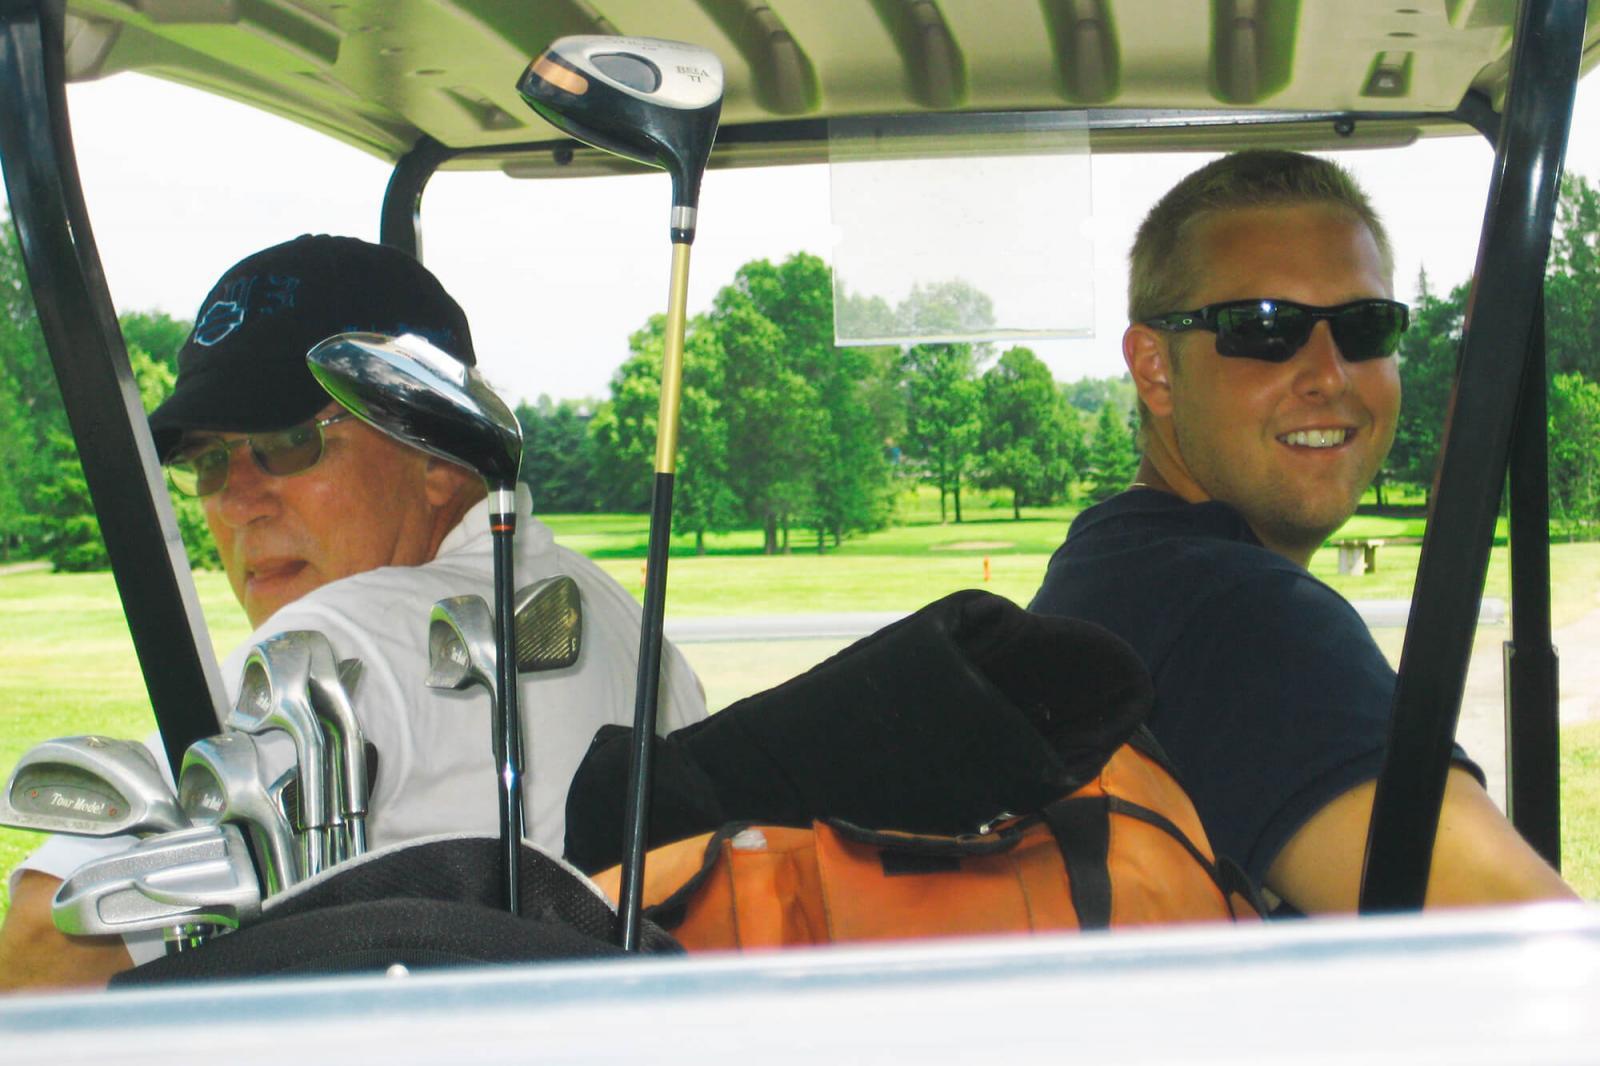 Eric Price, left, and Bill Cross of Thornbusch Landscaping Company enjoyed the day at the Upper Canada Golf Tournament on July 16.